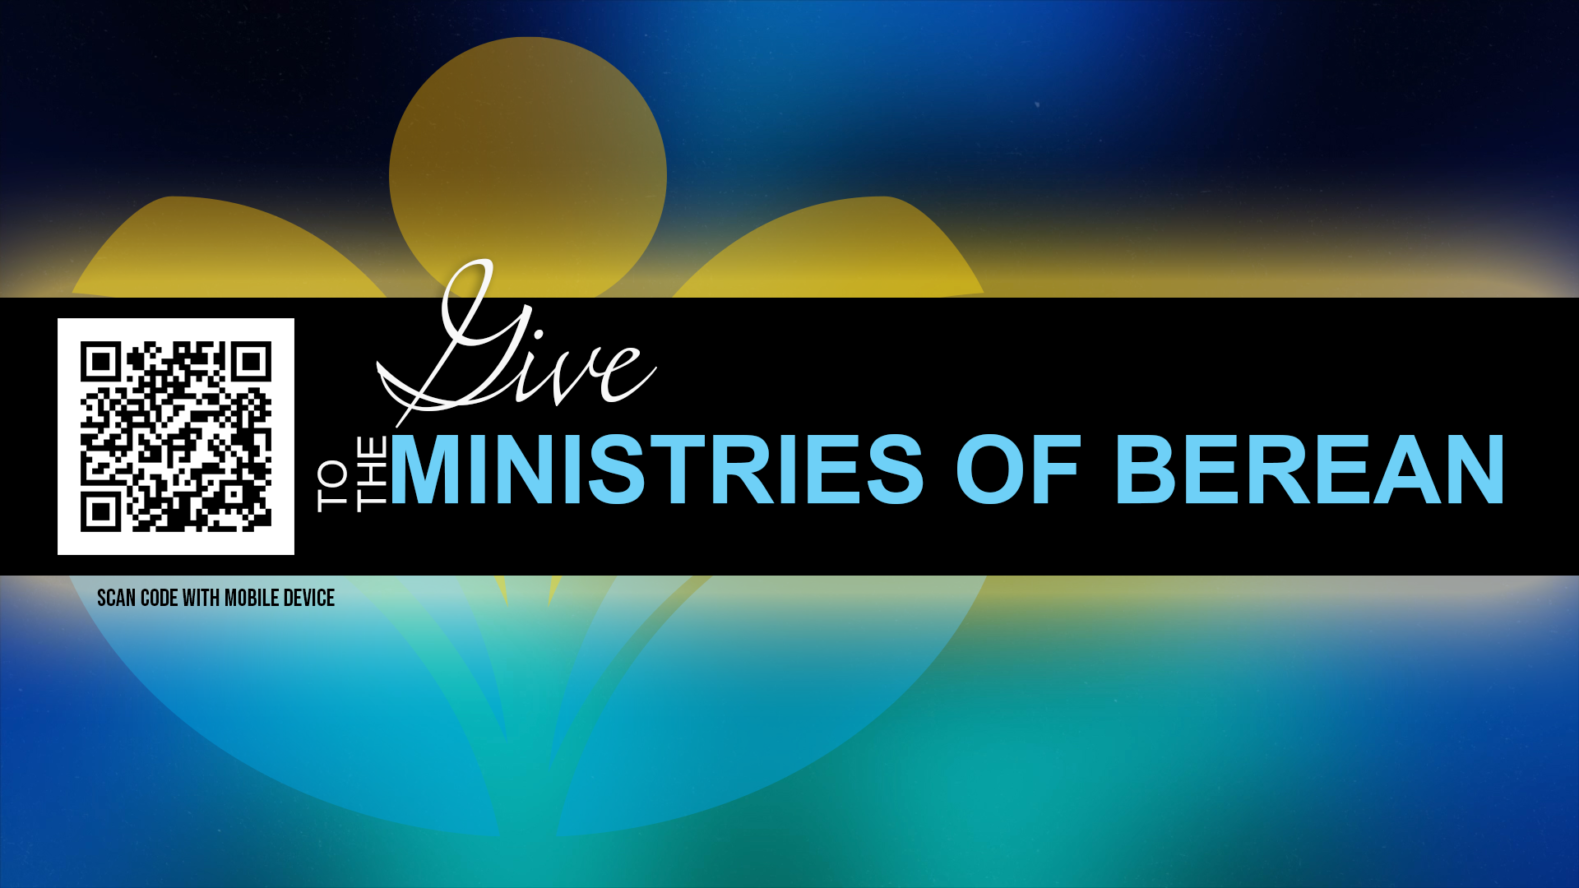 GIVE TO THE MINISTRIES OF BEREAN